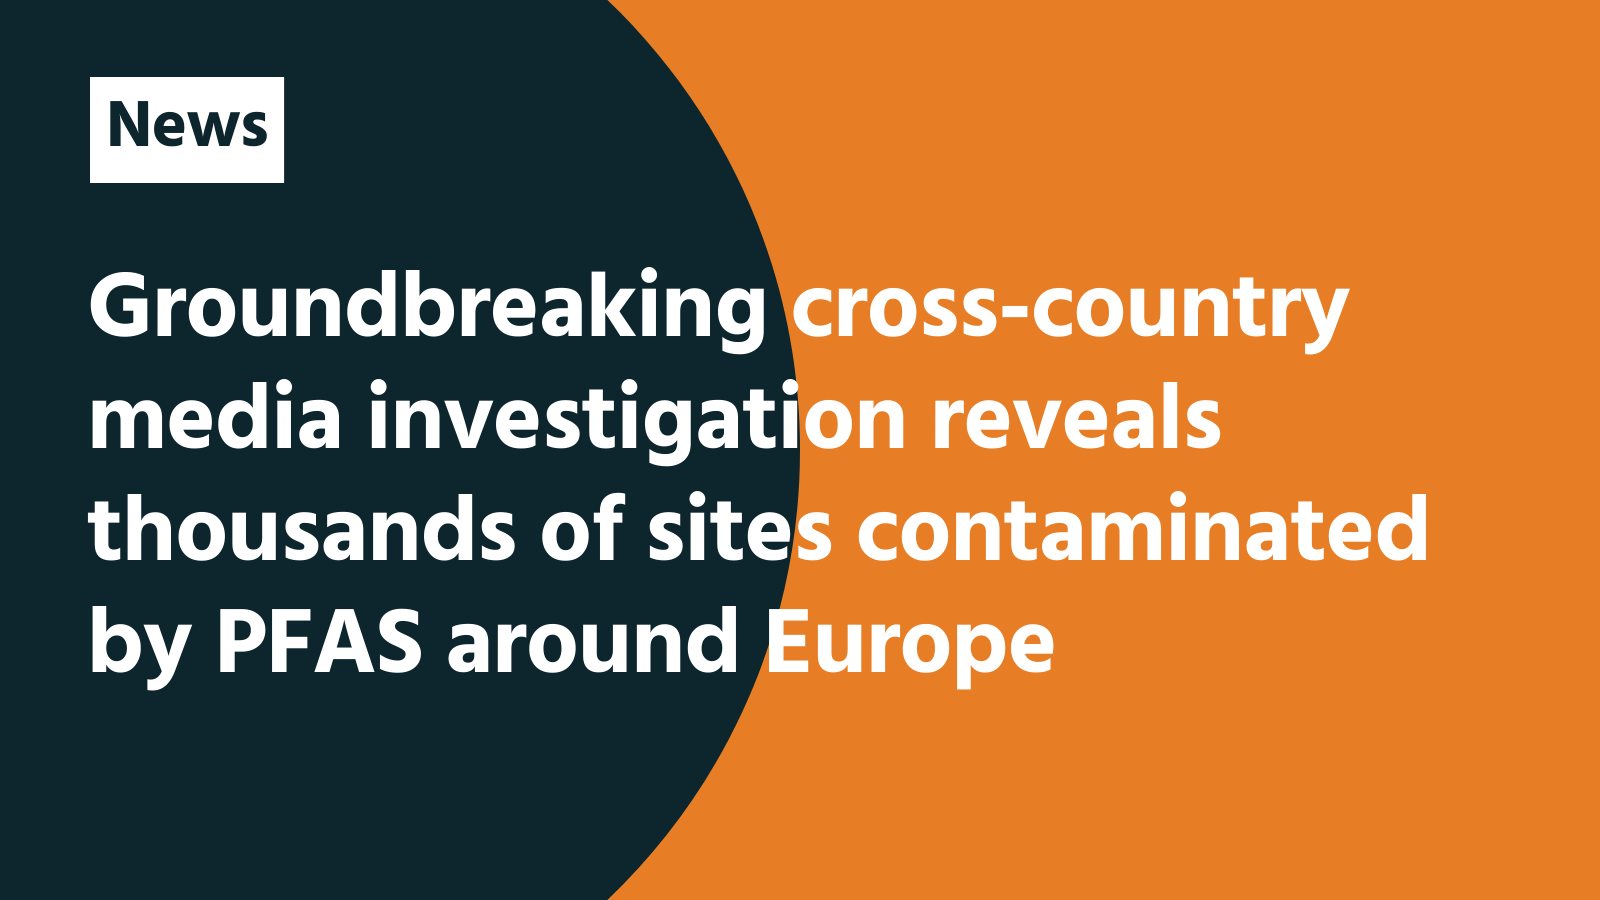 Groundbreaking cross-country media investigation reveals thousands of sites contaminated by PFAS around Europe